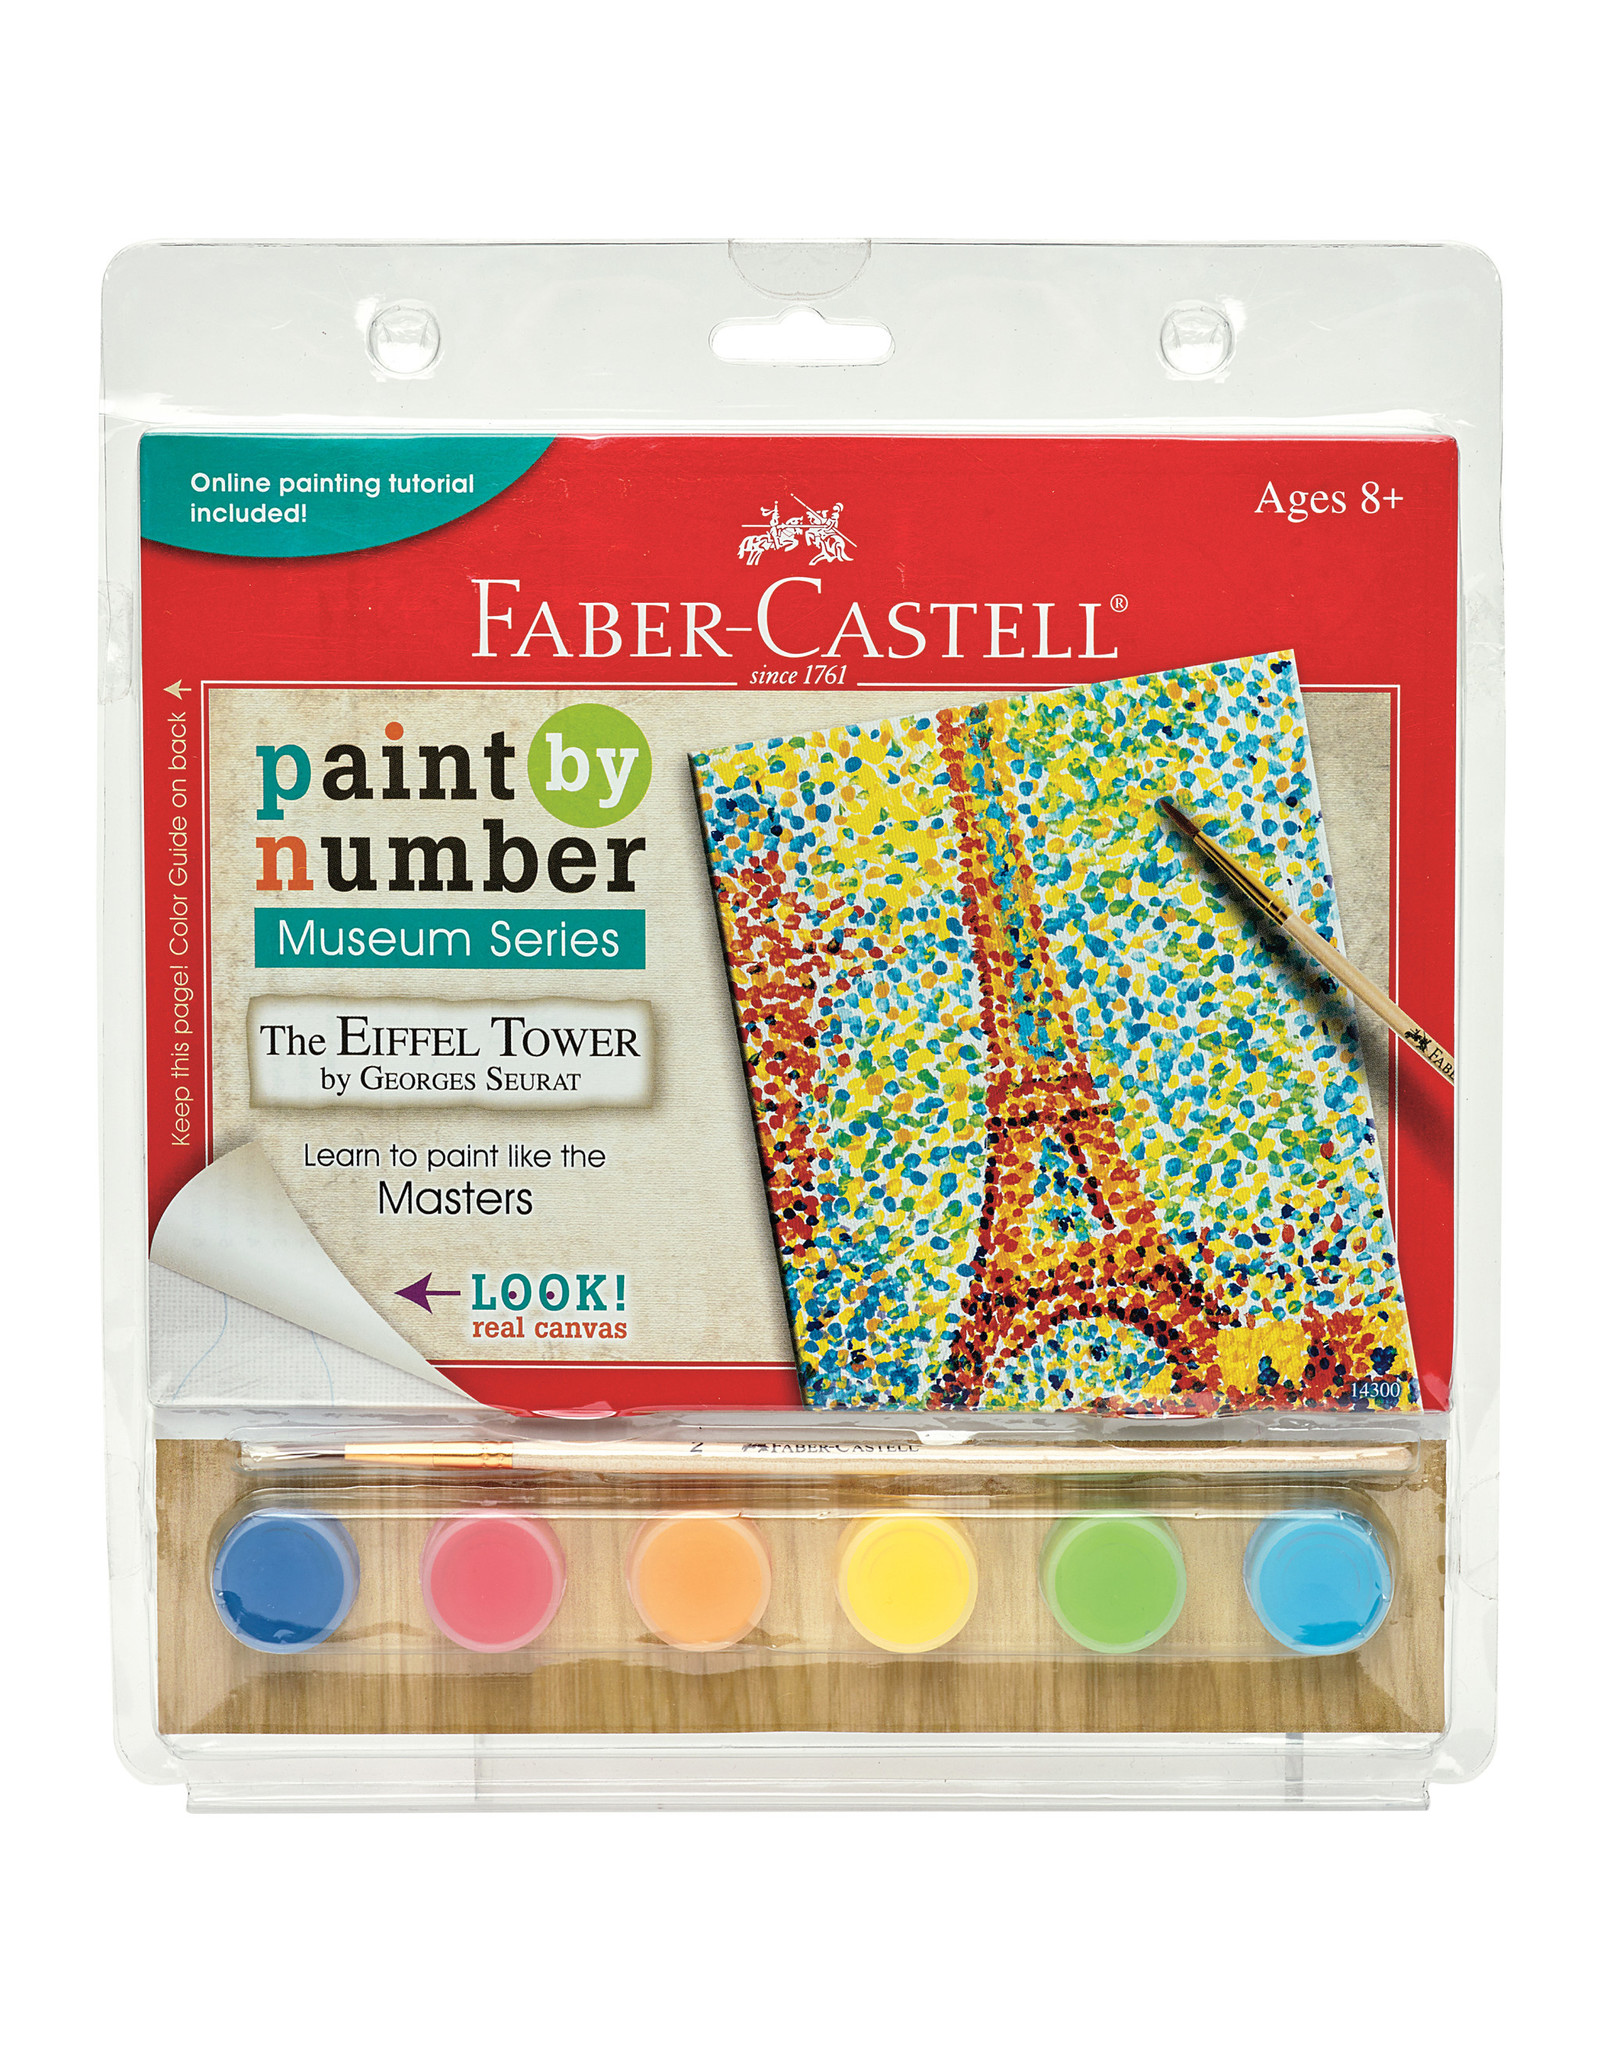 FABER-CASTELL Faber-Castell Paint by Number Museum Series, The Eiffel Tower